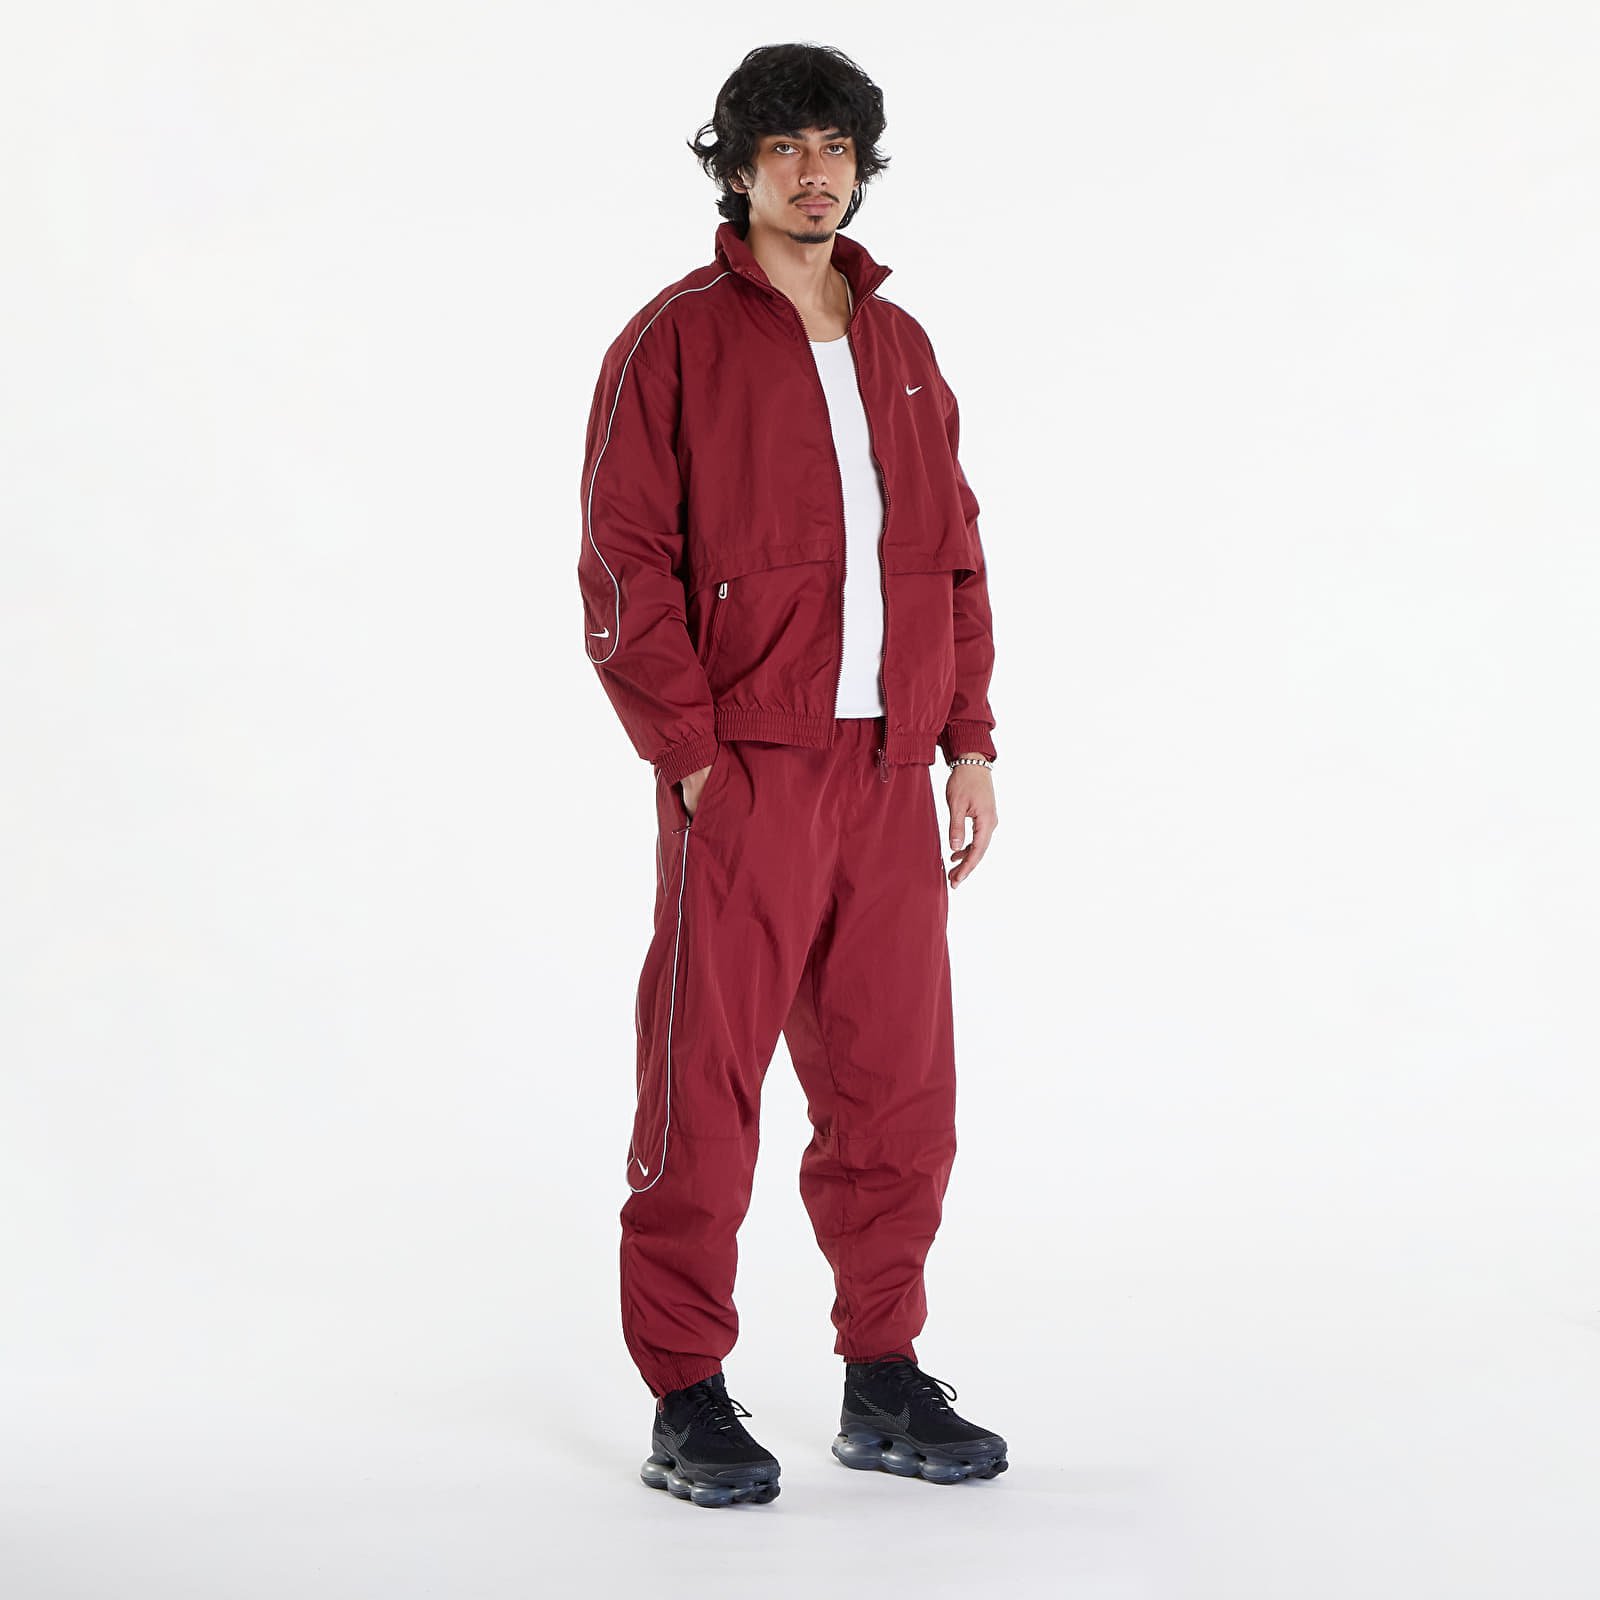 Solo Swoosh Track Pants Team Red/ White